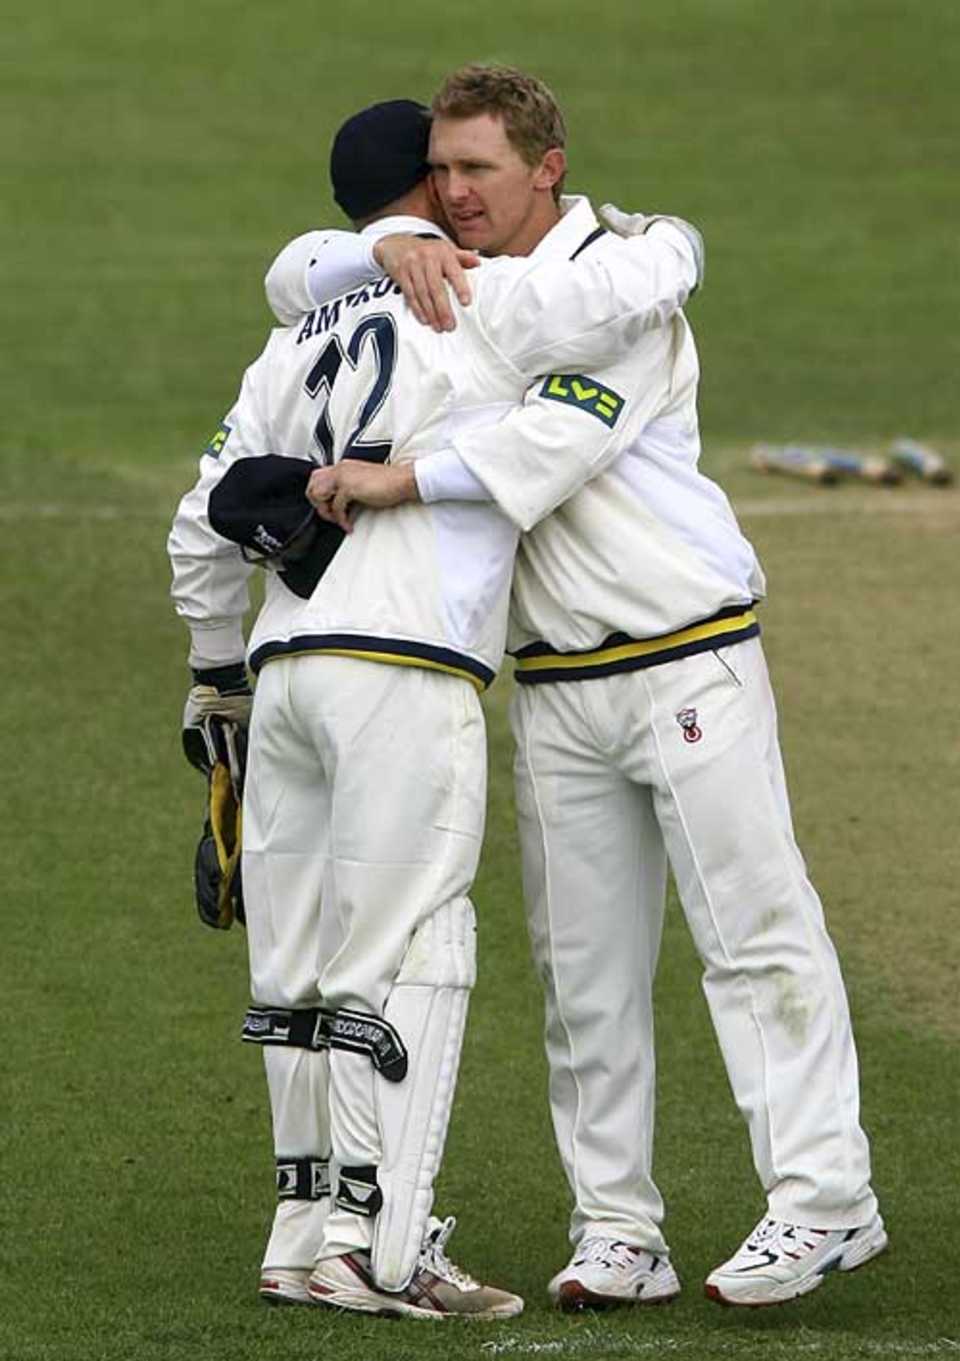 Darren Maddy celebrates victory in his first match as Warwickshire captain with Tim Ambrose